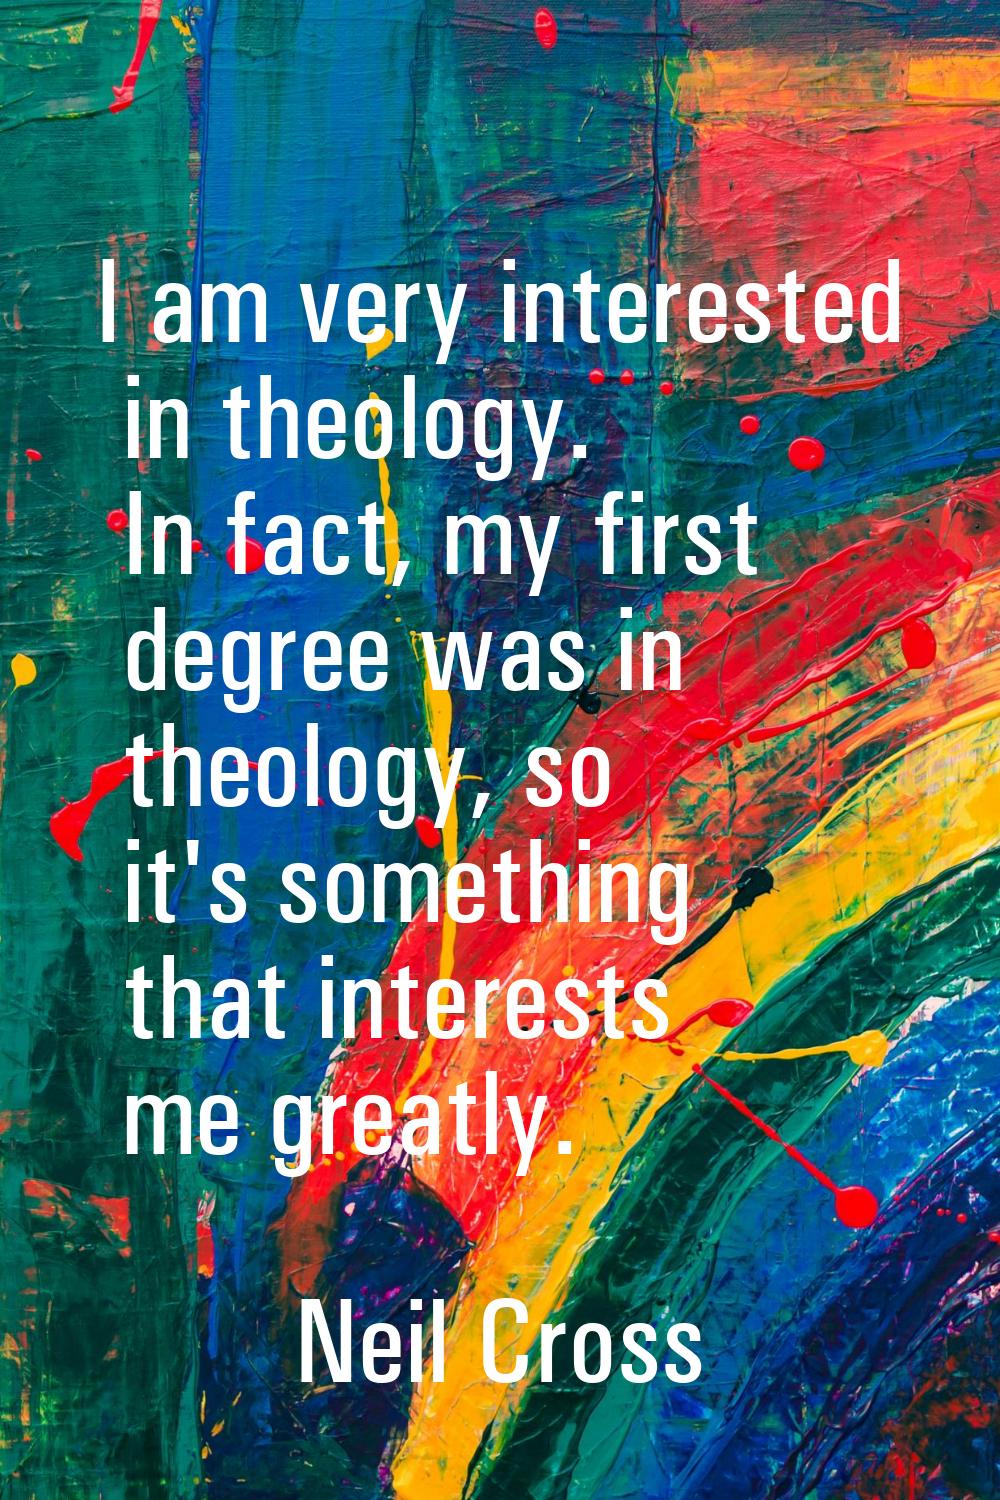 I am very interested in theology. In fact, my first degree was in theology, so it's something that 